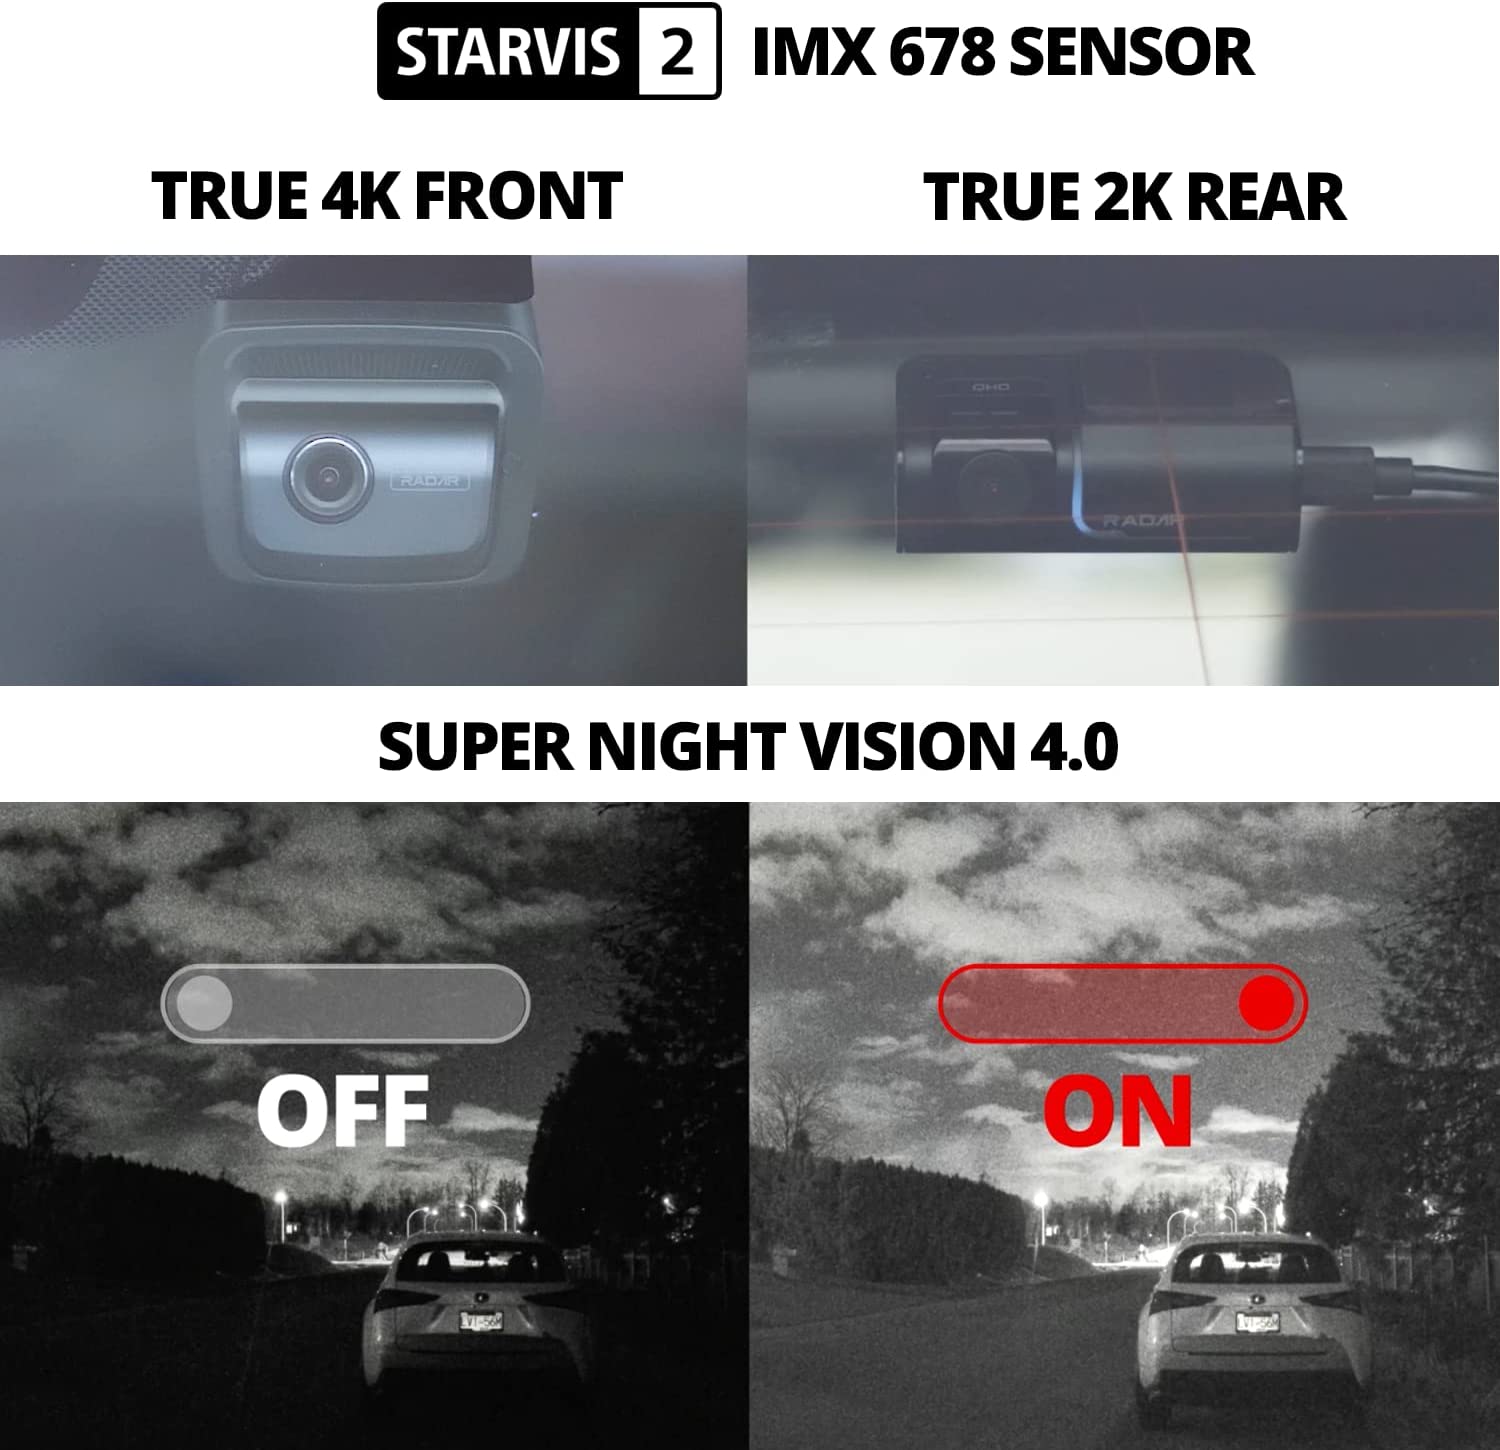 What You Should Know About the Sony STARVIS 2 Sensor